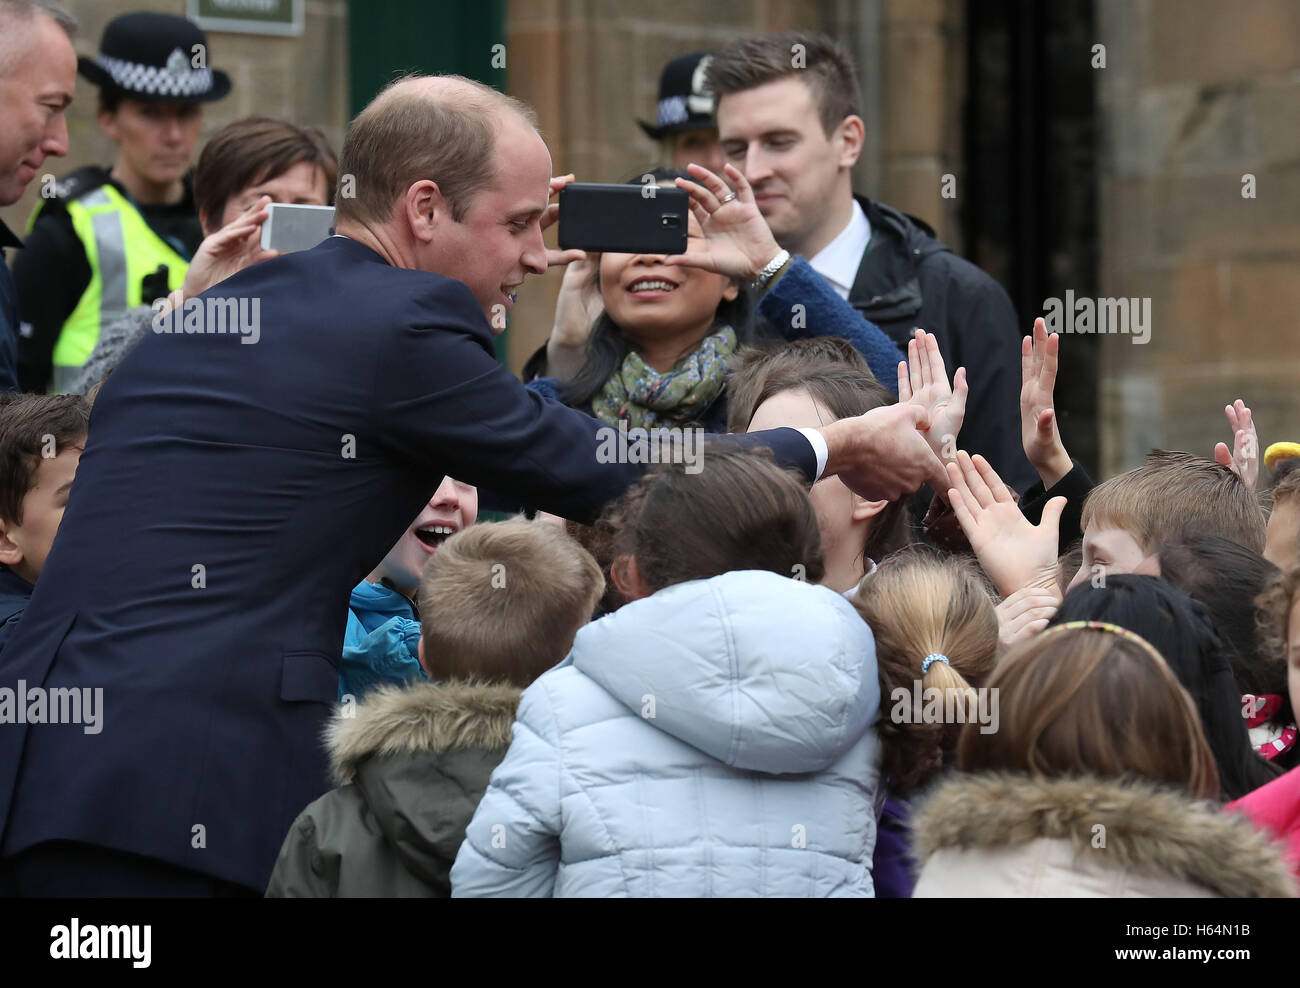 The Duke of Cambridge, known as the Earl of Strathearn in Scotland, meets children from Allan's Primary School as he leaves the Argyll and Sutherland Highlanders Regimental Museum at Stirling Castle after a visit. Stock Photo